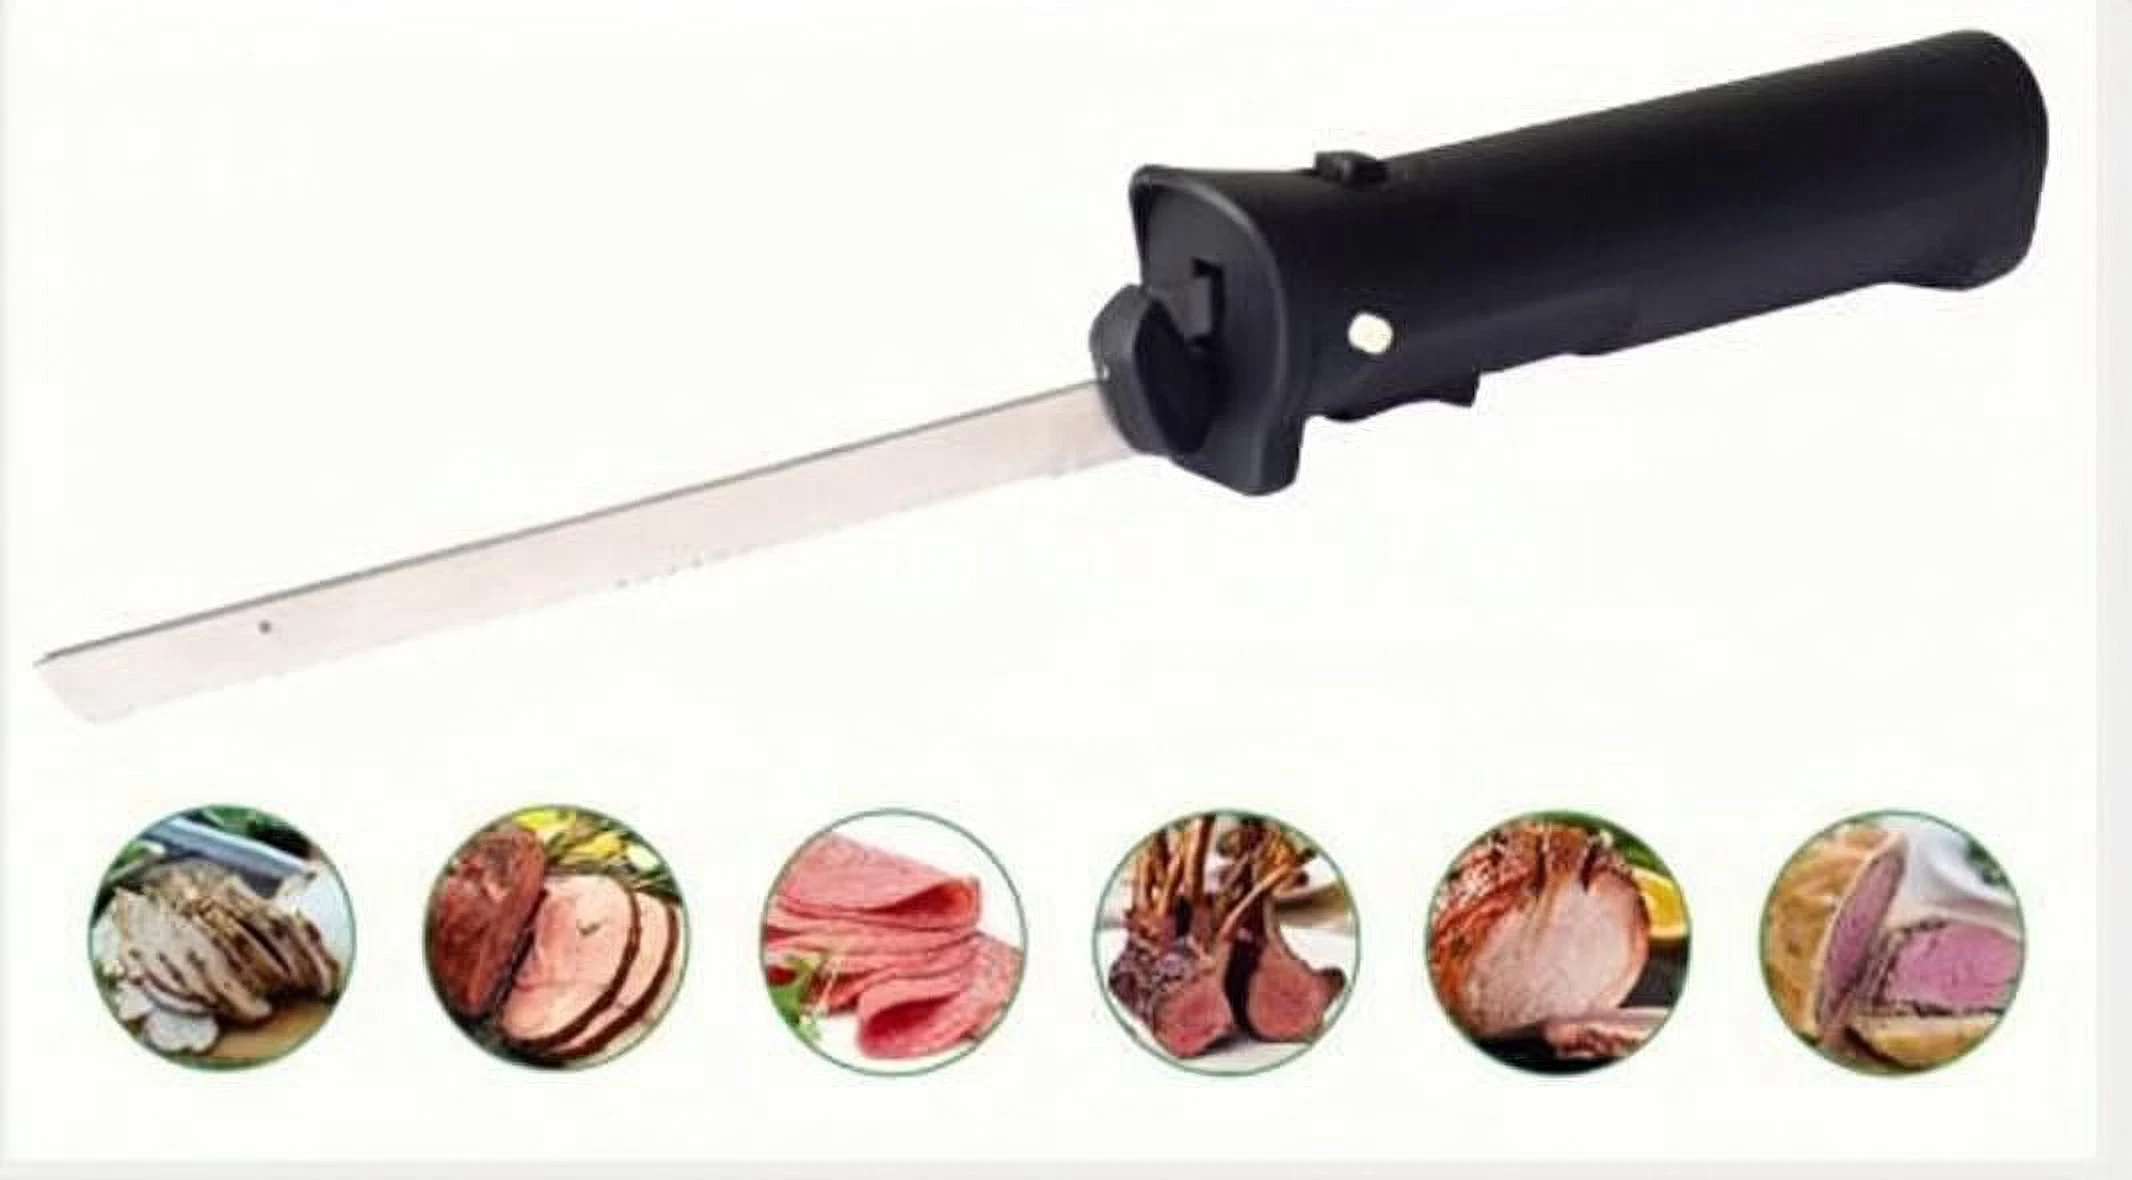 New Tech-Battery Cordless/Electric Kitchen Cookware-Automatic Meat/Bread/Vegetables Cutting Knife-Power Tools